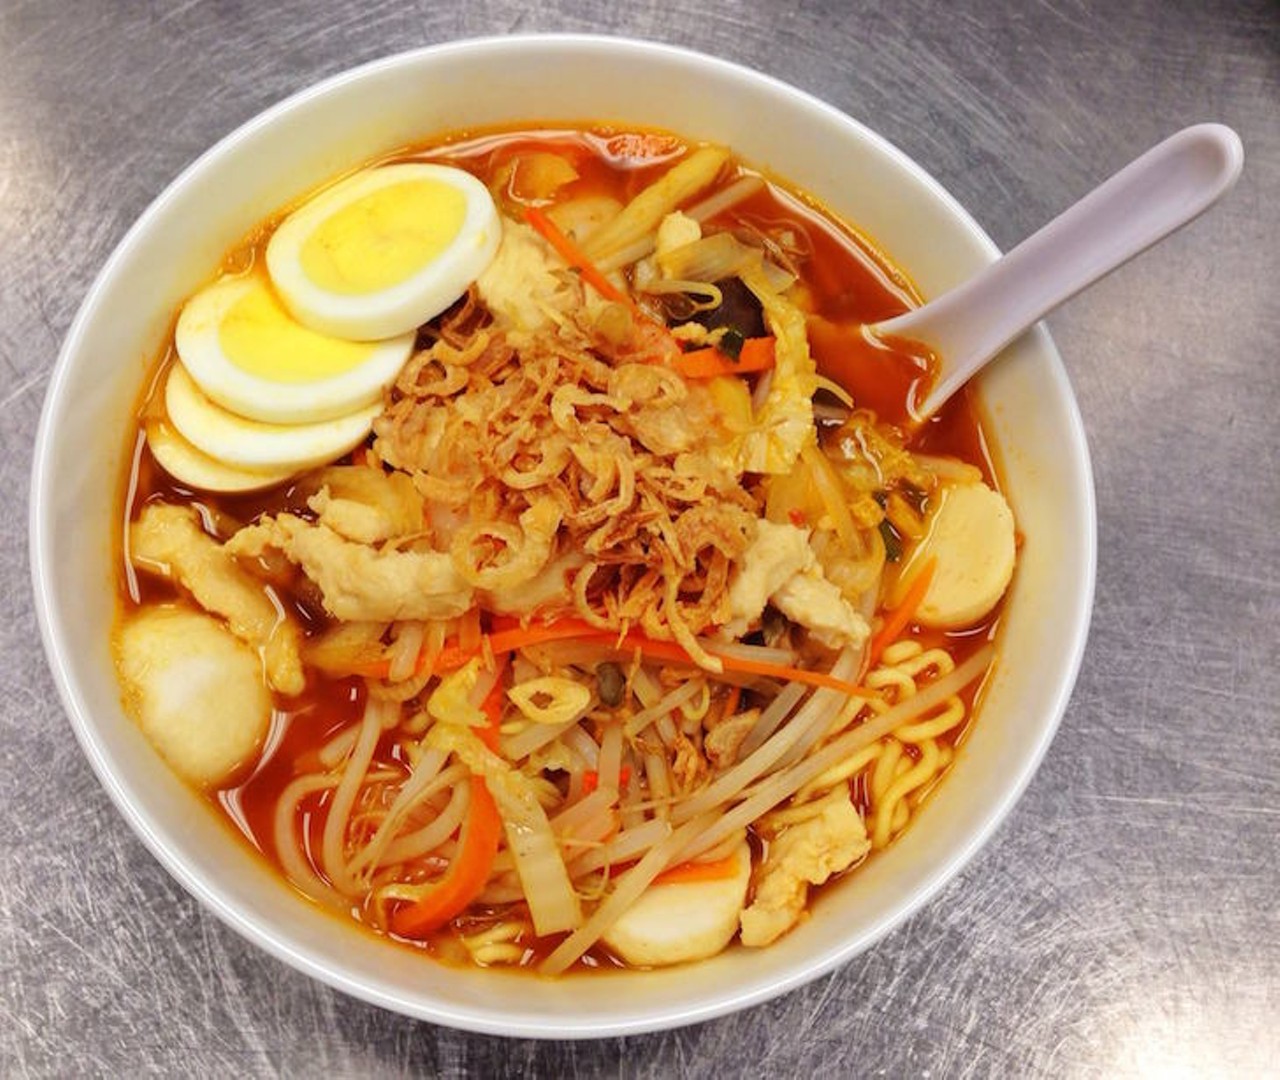 Kari mee: egg noodles, shrimp, chicken, hard boiled egg, fried bean curd and veggies, in a curry broth, topped with fried shallots
Mamak Asian Street Food, 1231 E. Colonial Drive
Photo via Mamak on Facebook